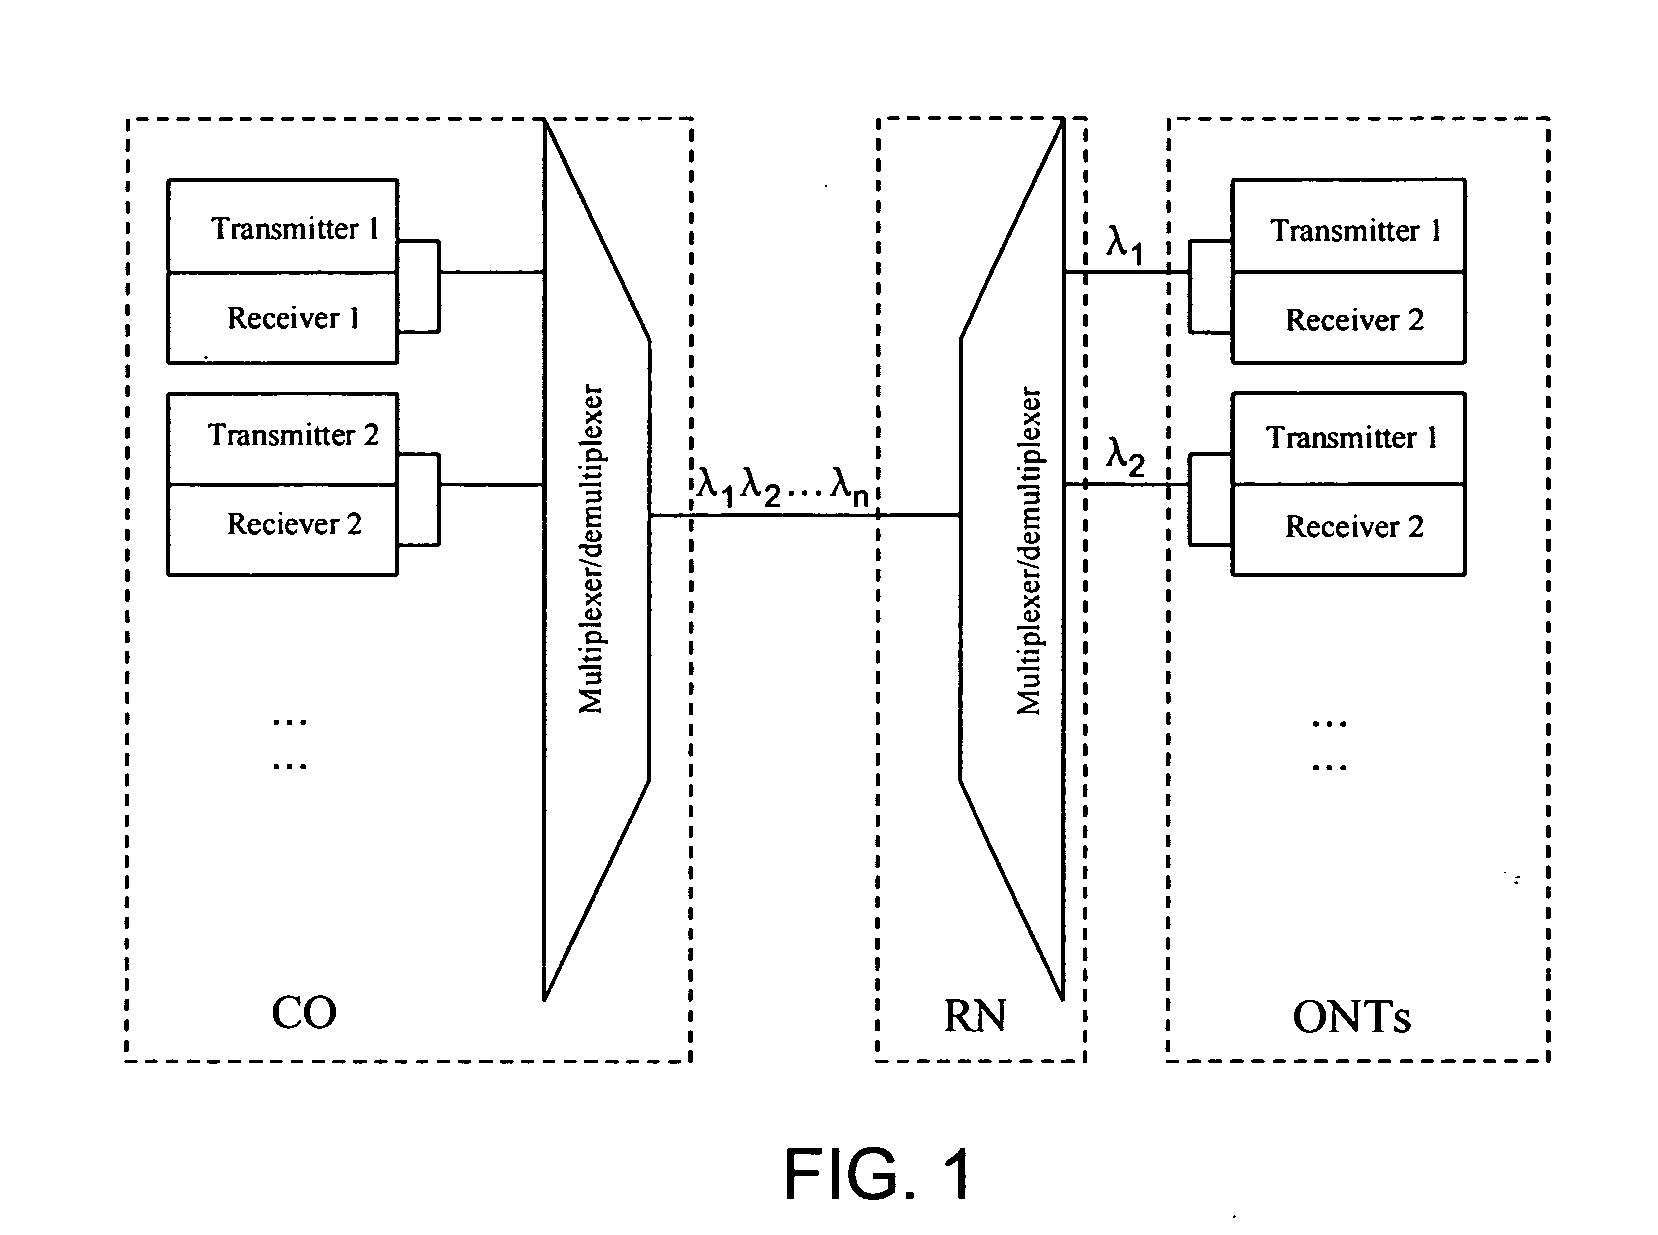 System and method for providing failure protection in optical networks